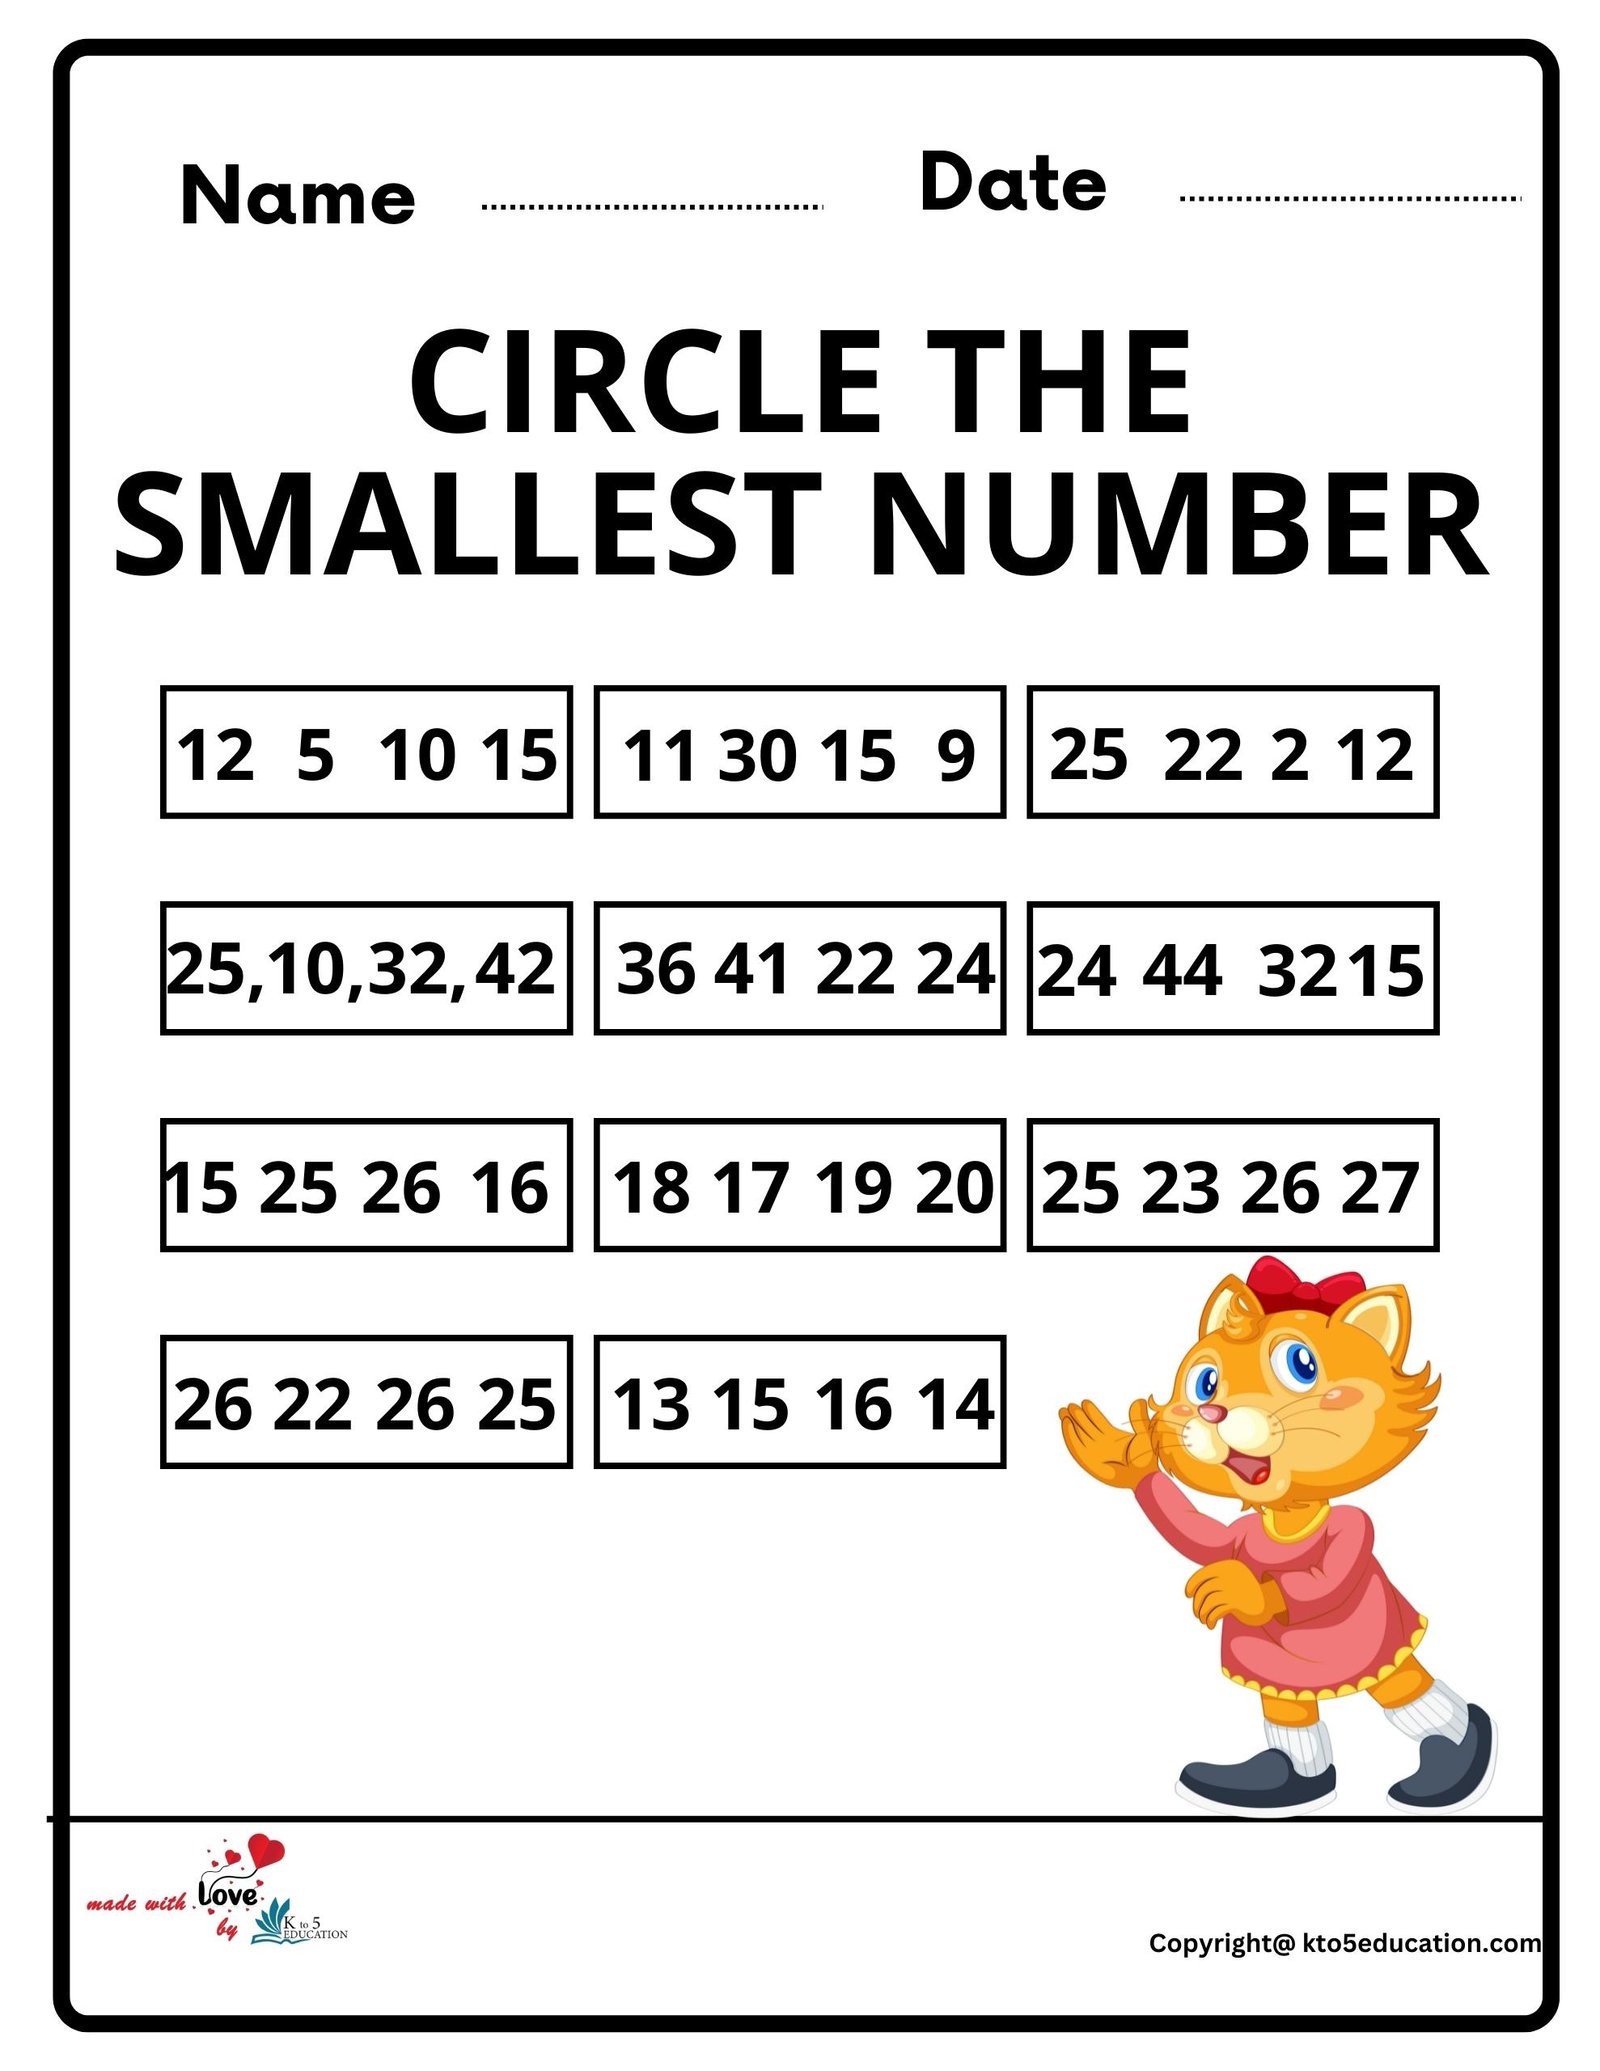 Circle The Smallest Number Worksheet 2 FREE Download